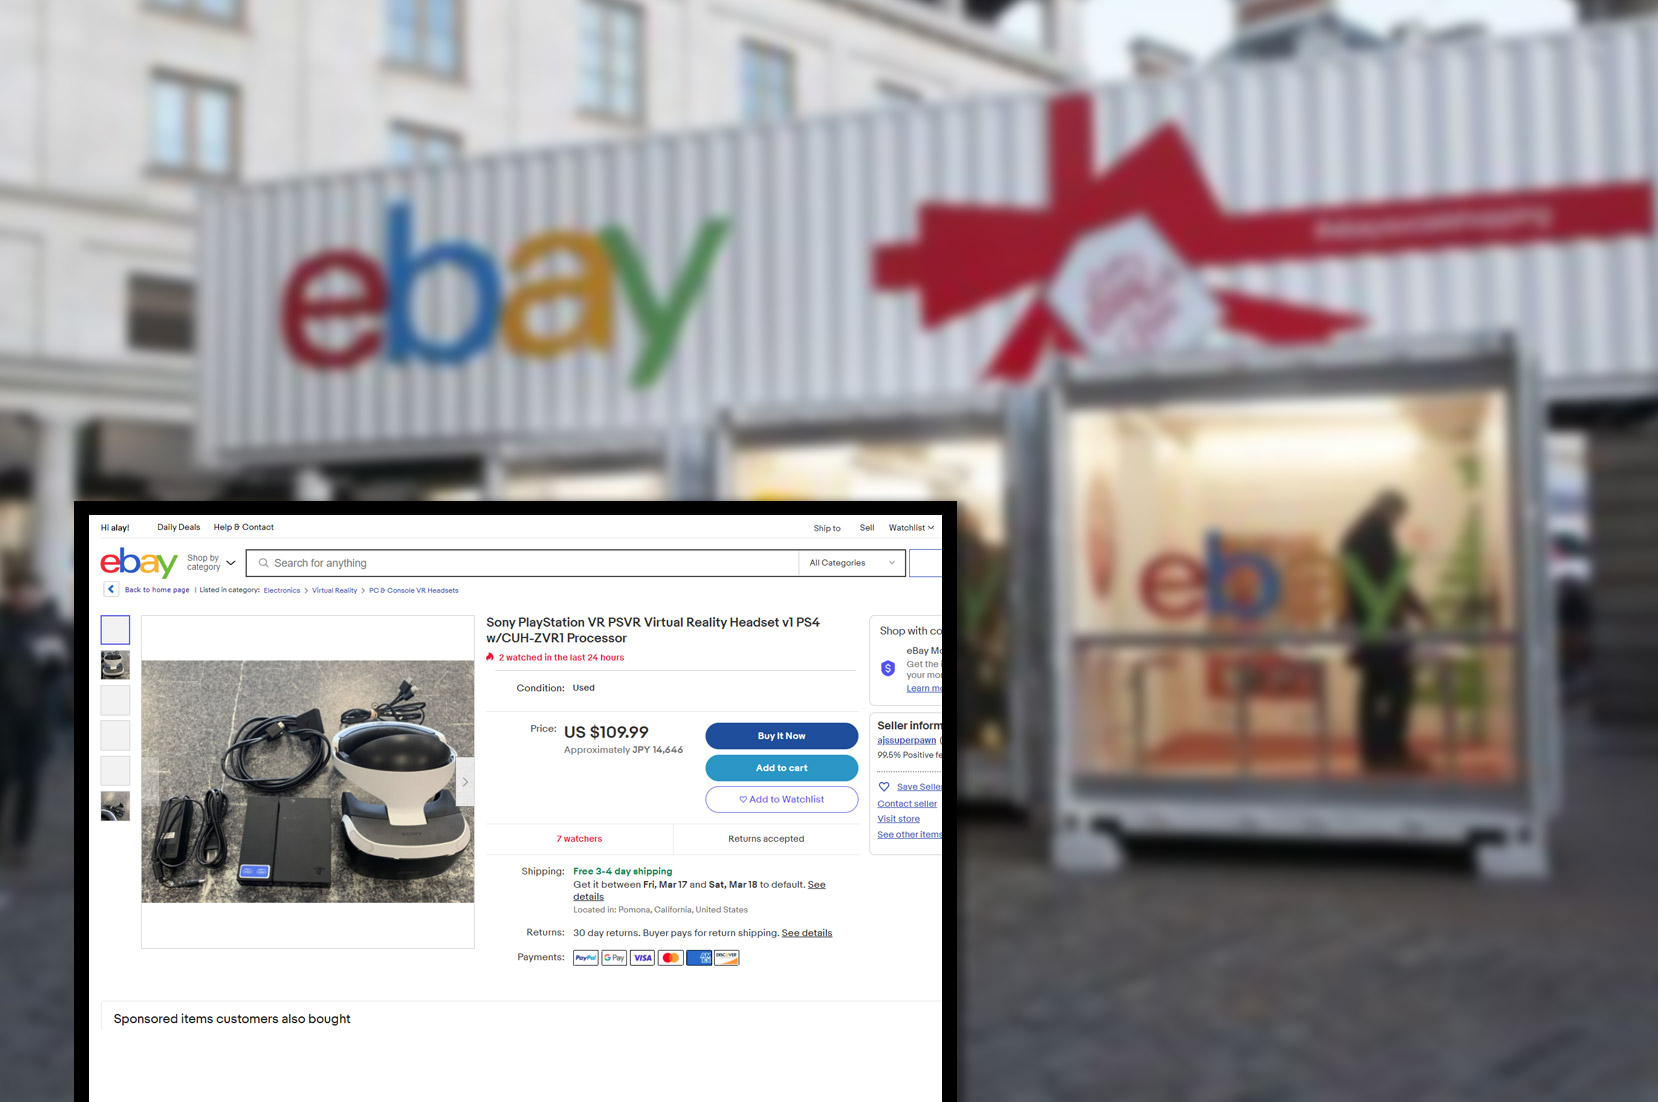 ebayproduct-pricing-information-and-image-scraping-services